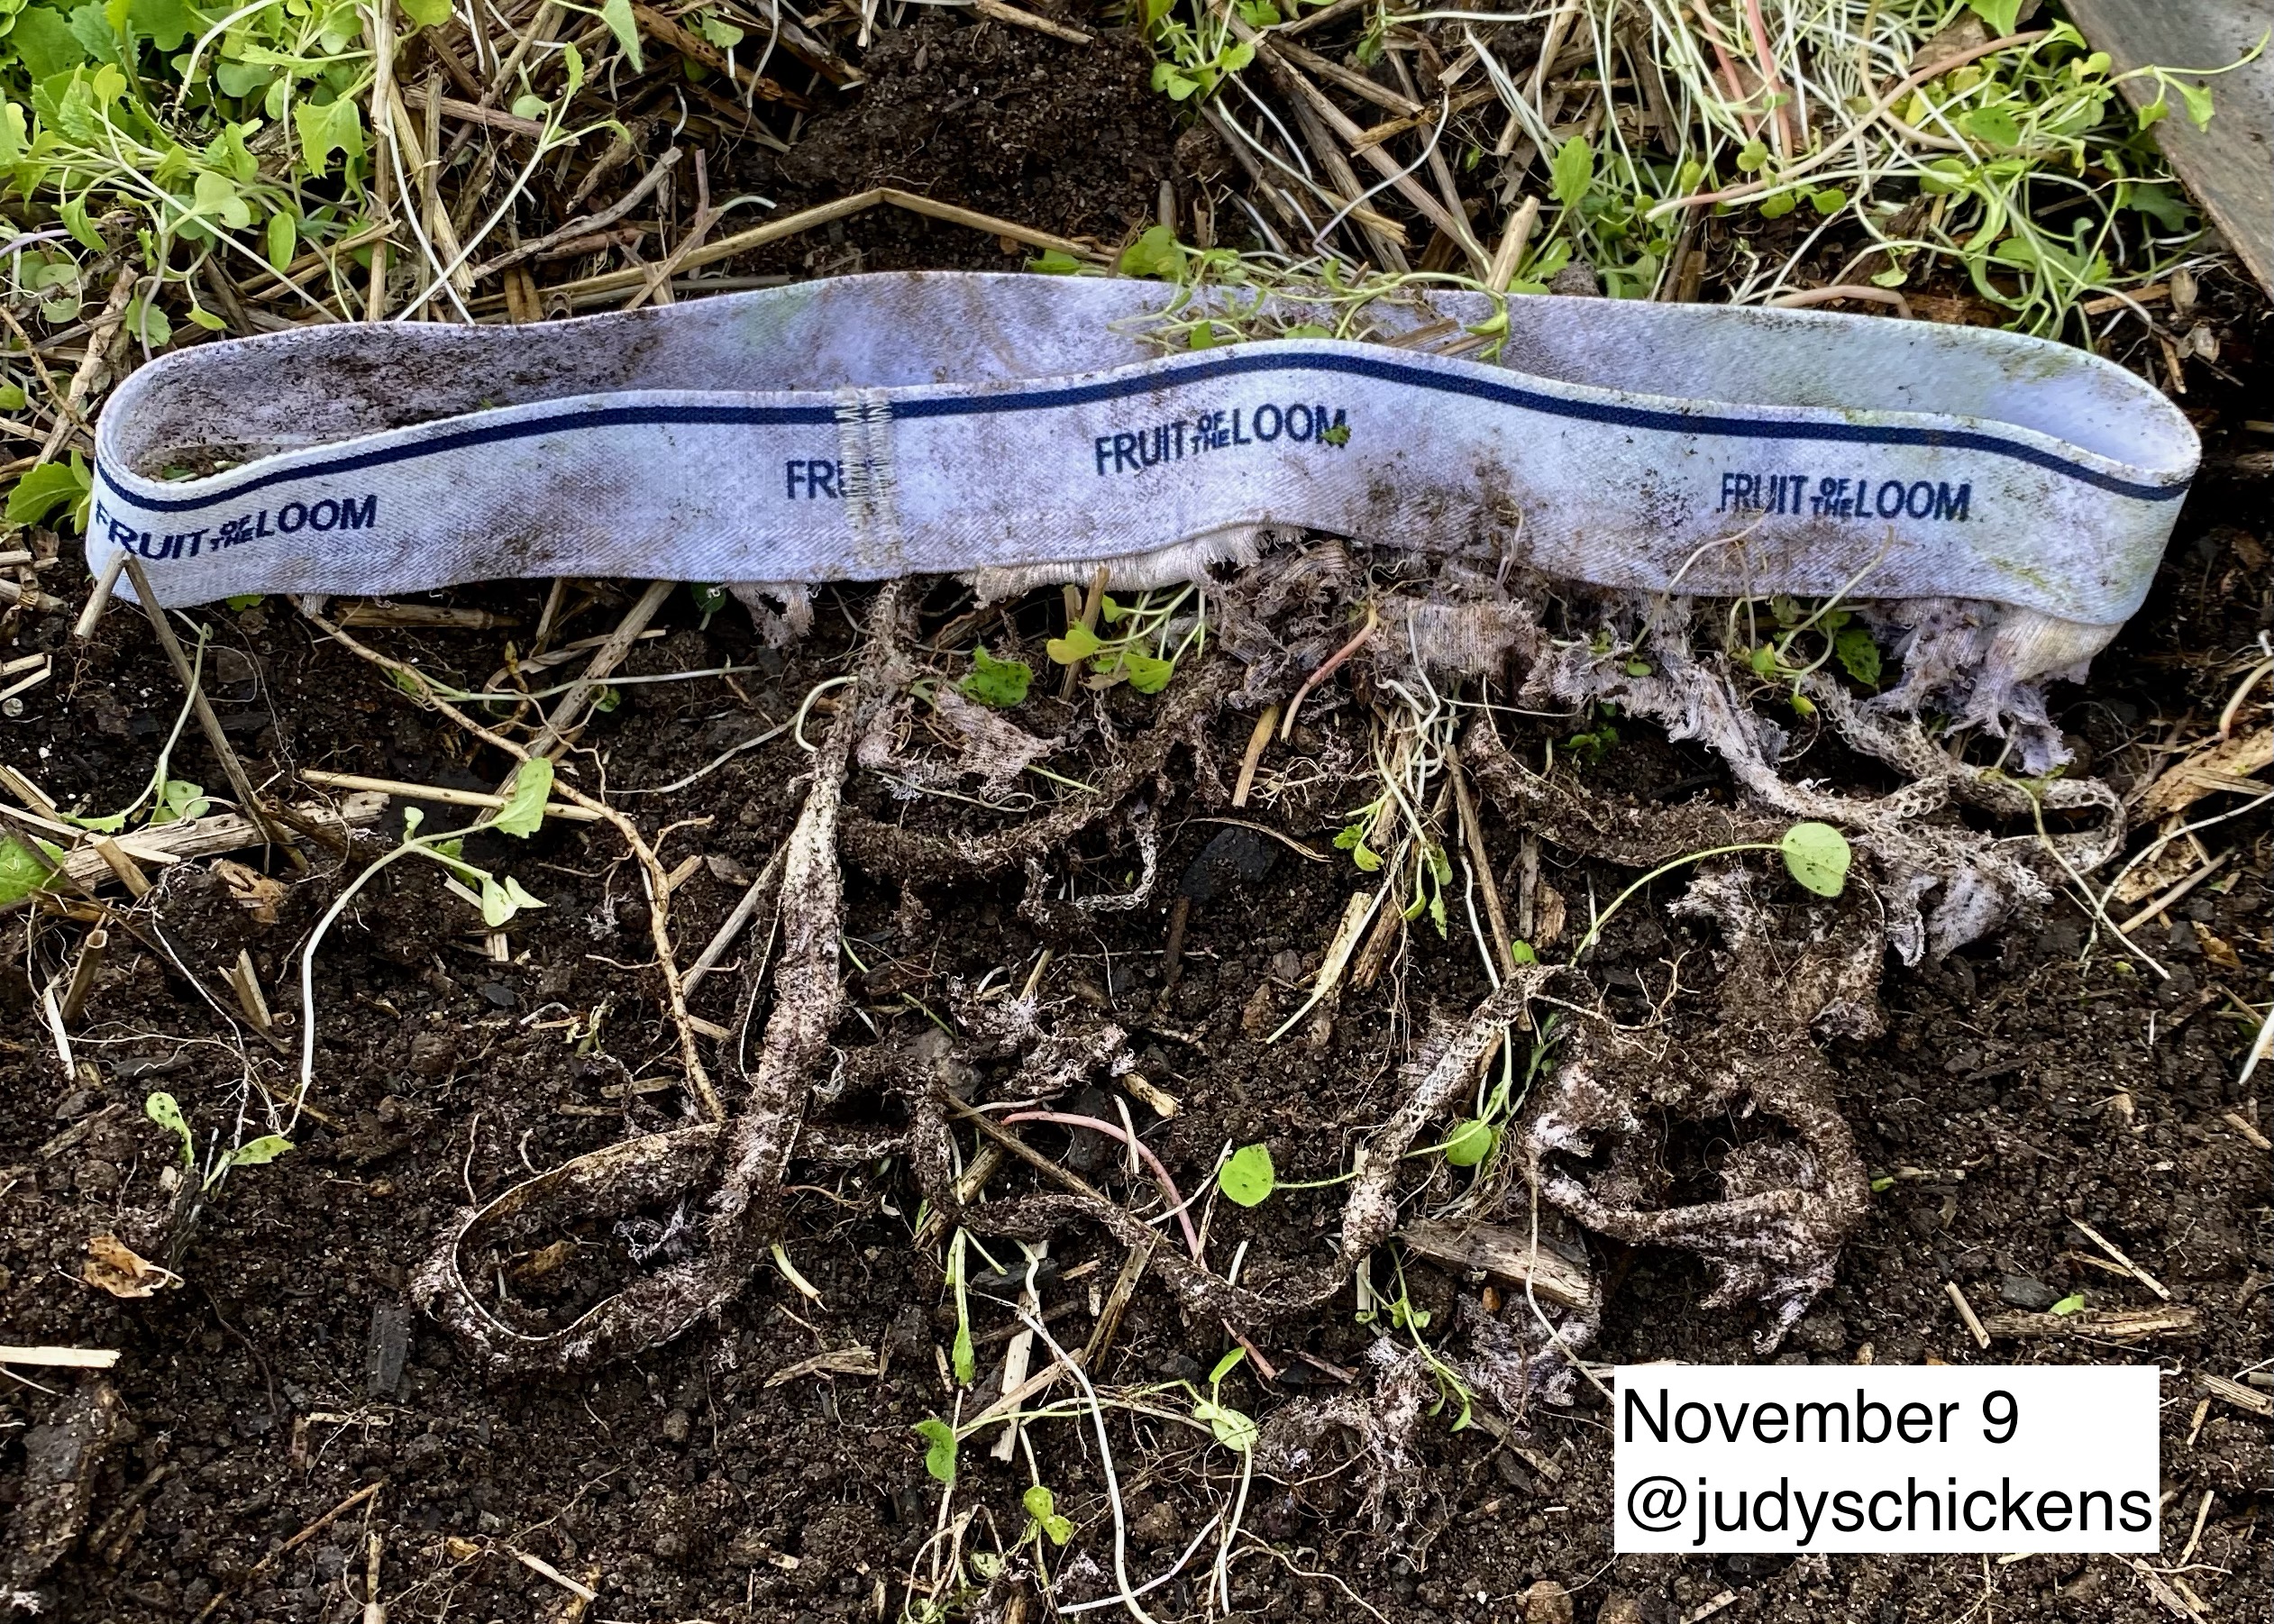 The Soil Your Undies Challenge- A Simple Home DIY Test for Soil